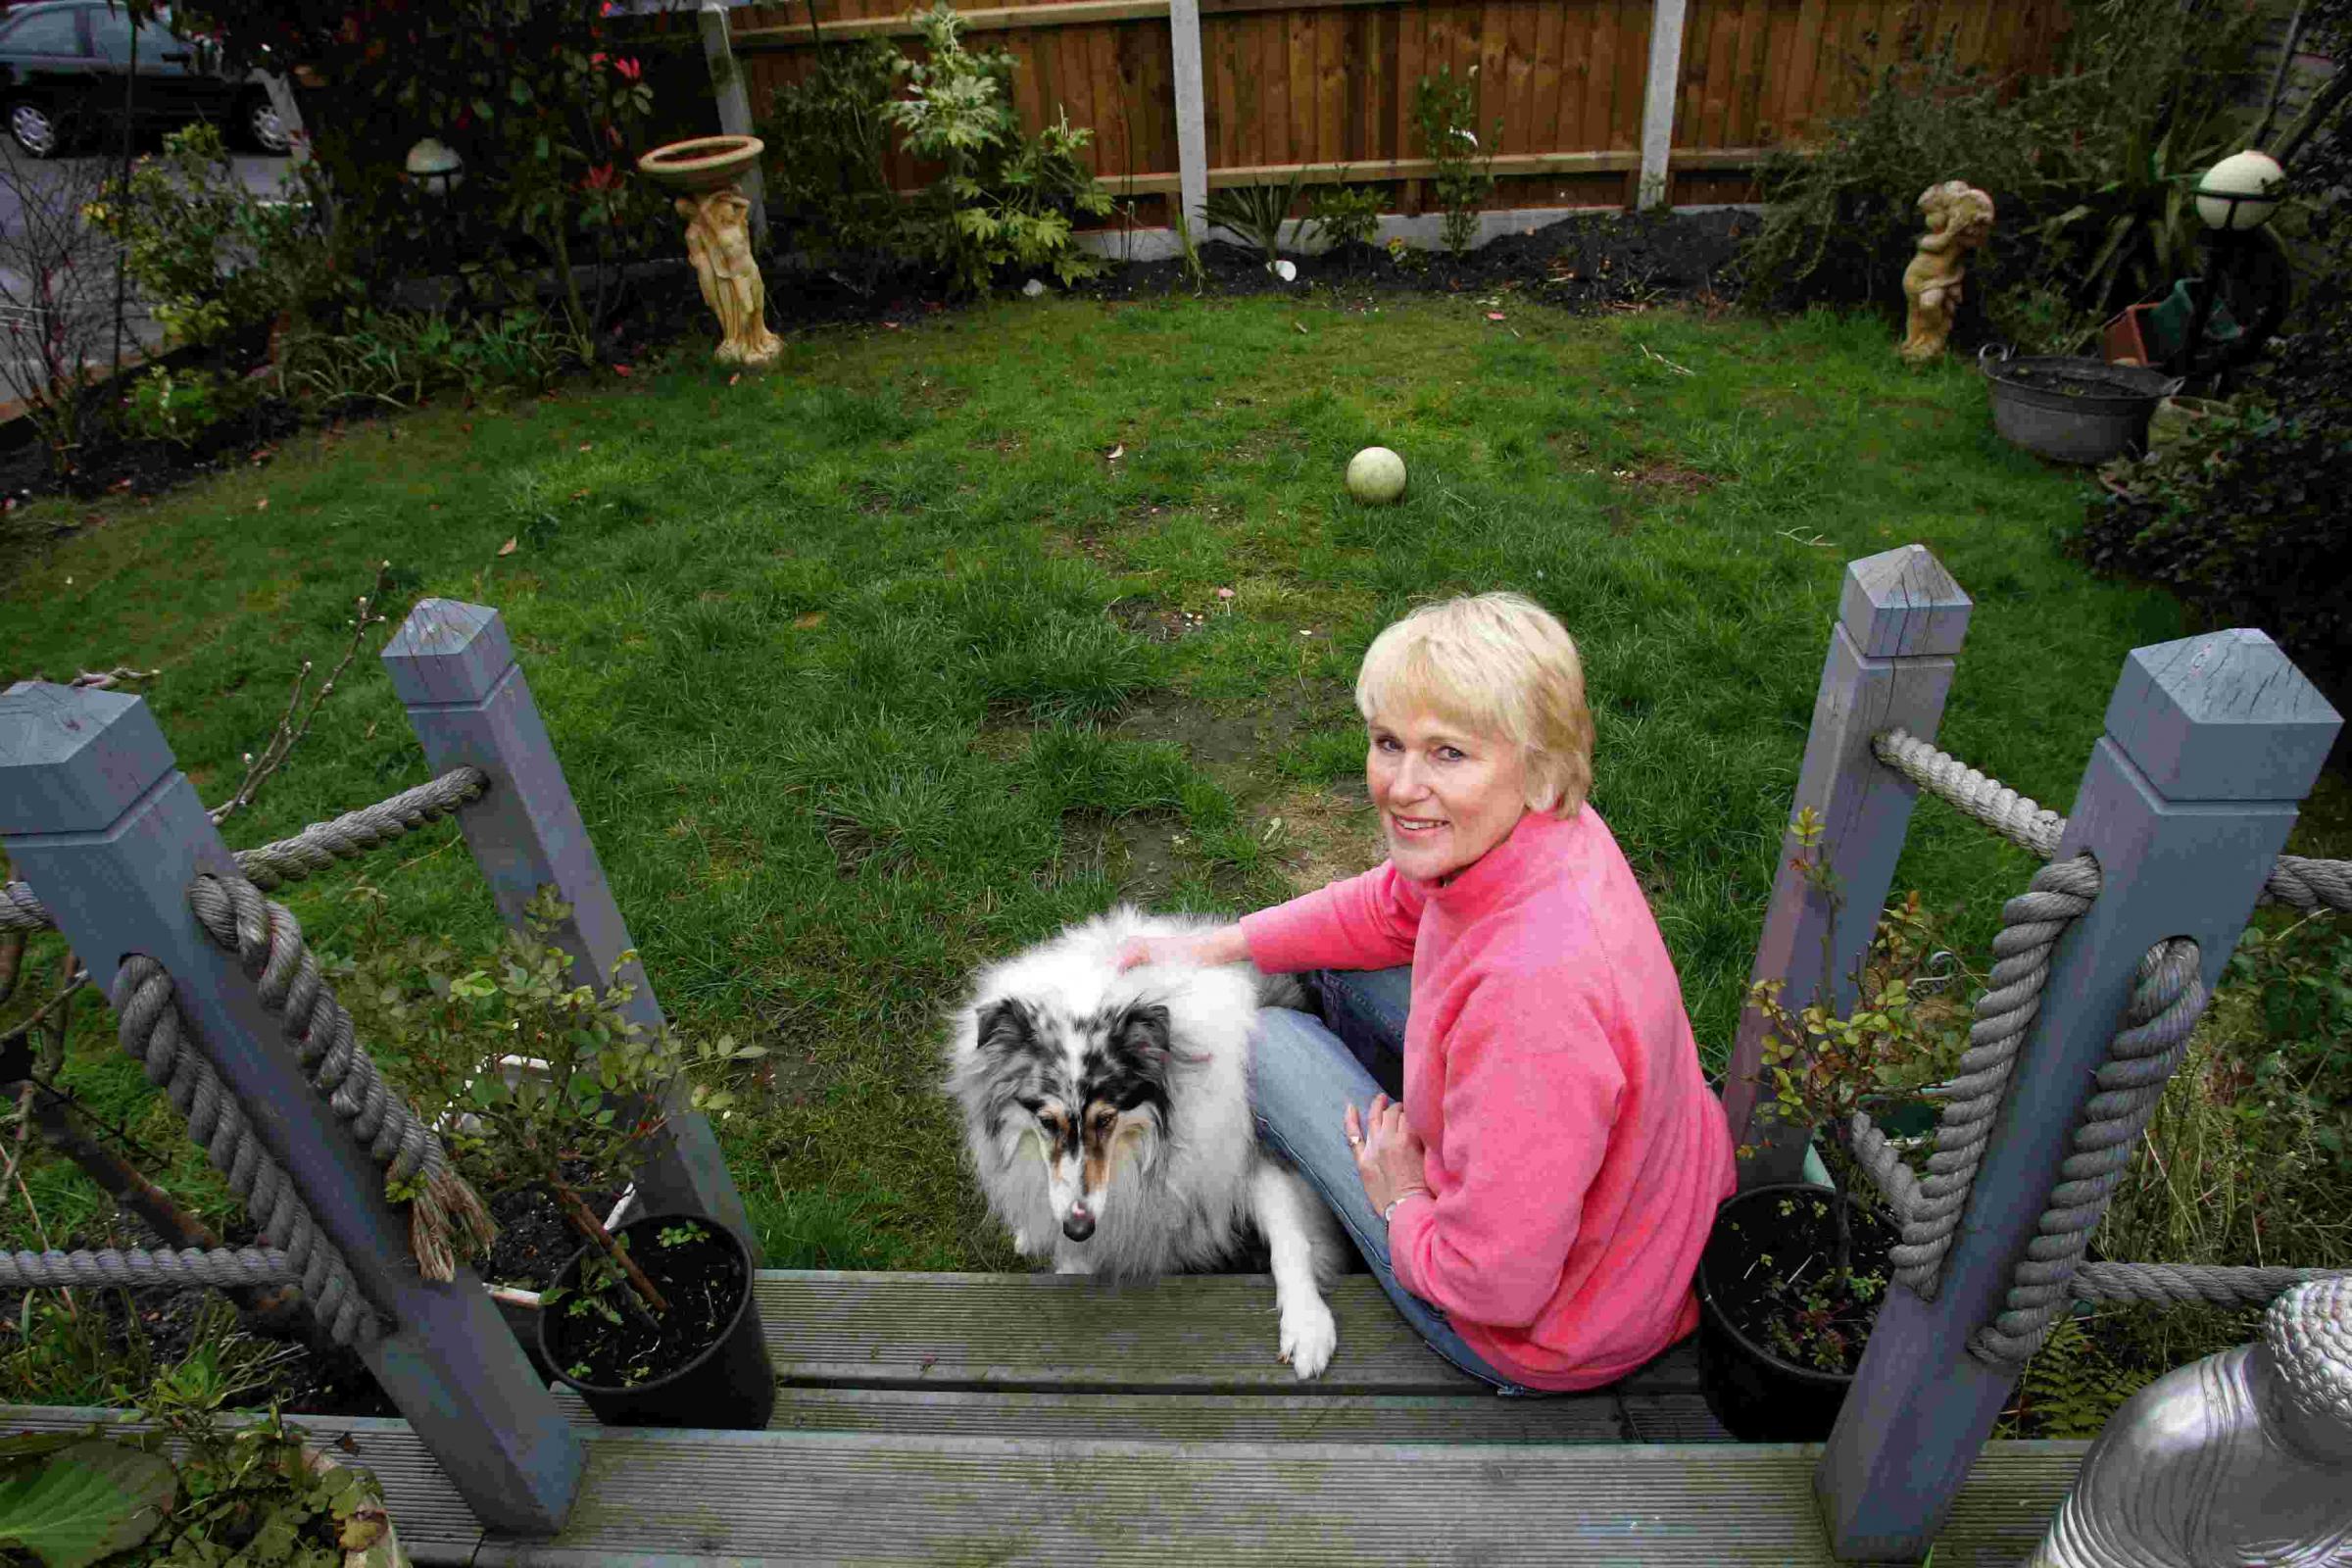 Pic by Sally Adams 18/3/08 bIgcat3 Pam Skilton with her dog Sadie in her garden where she saw the big cat.